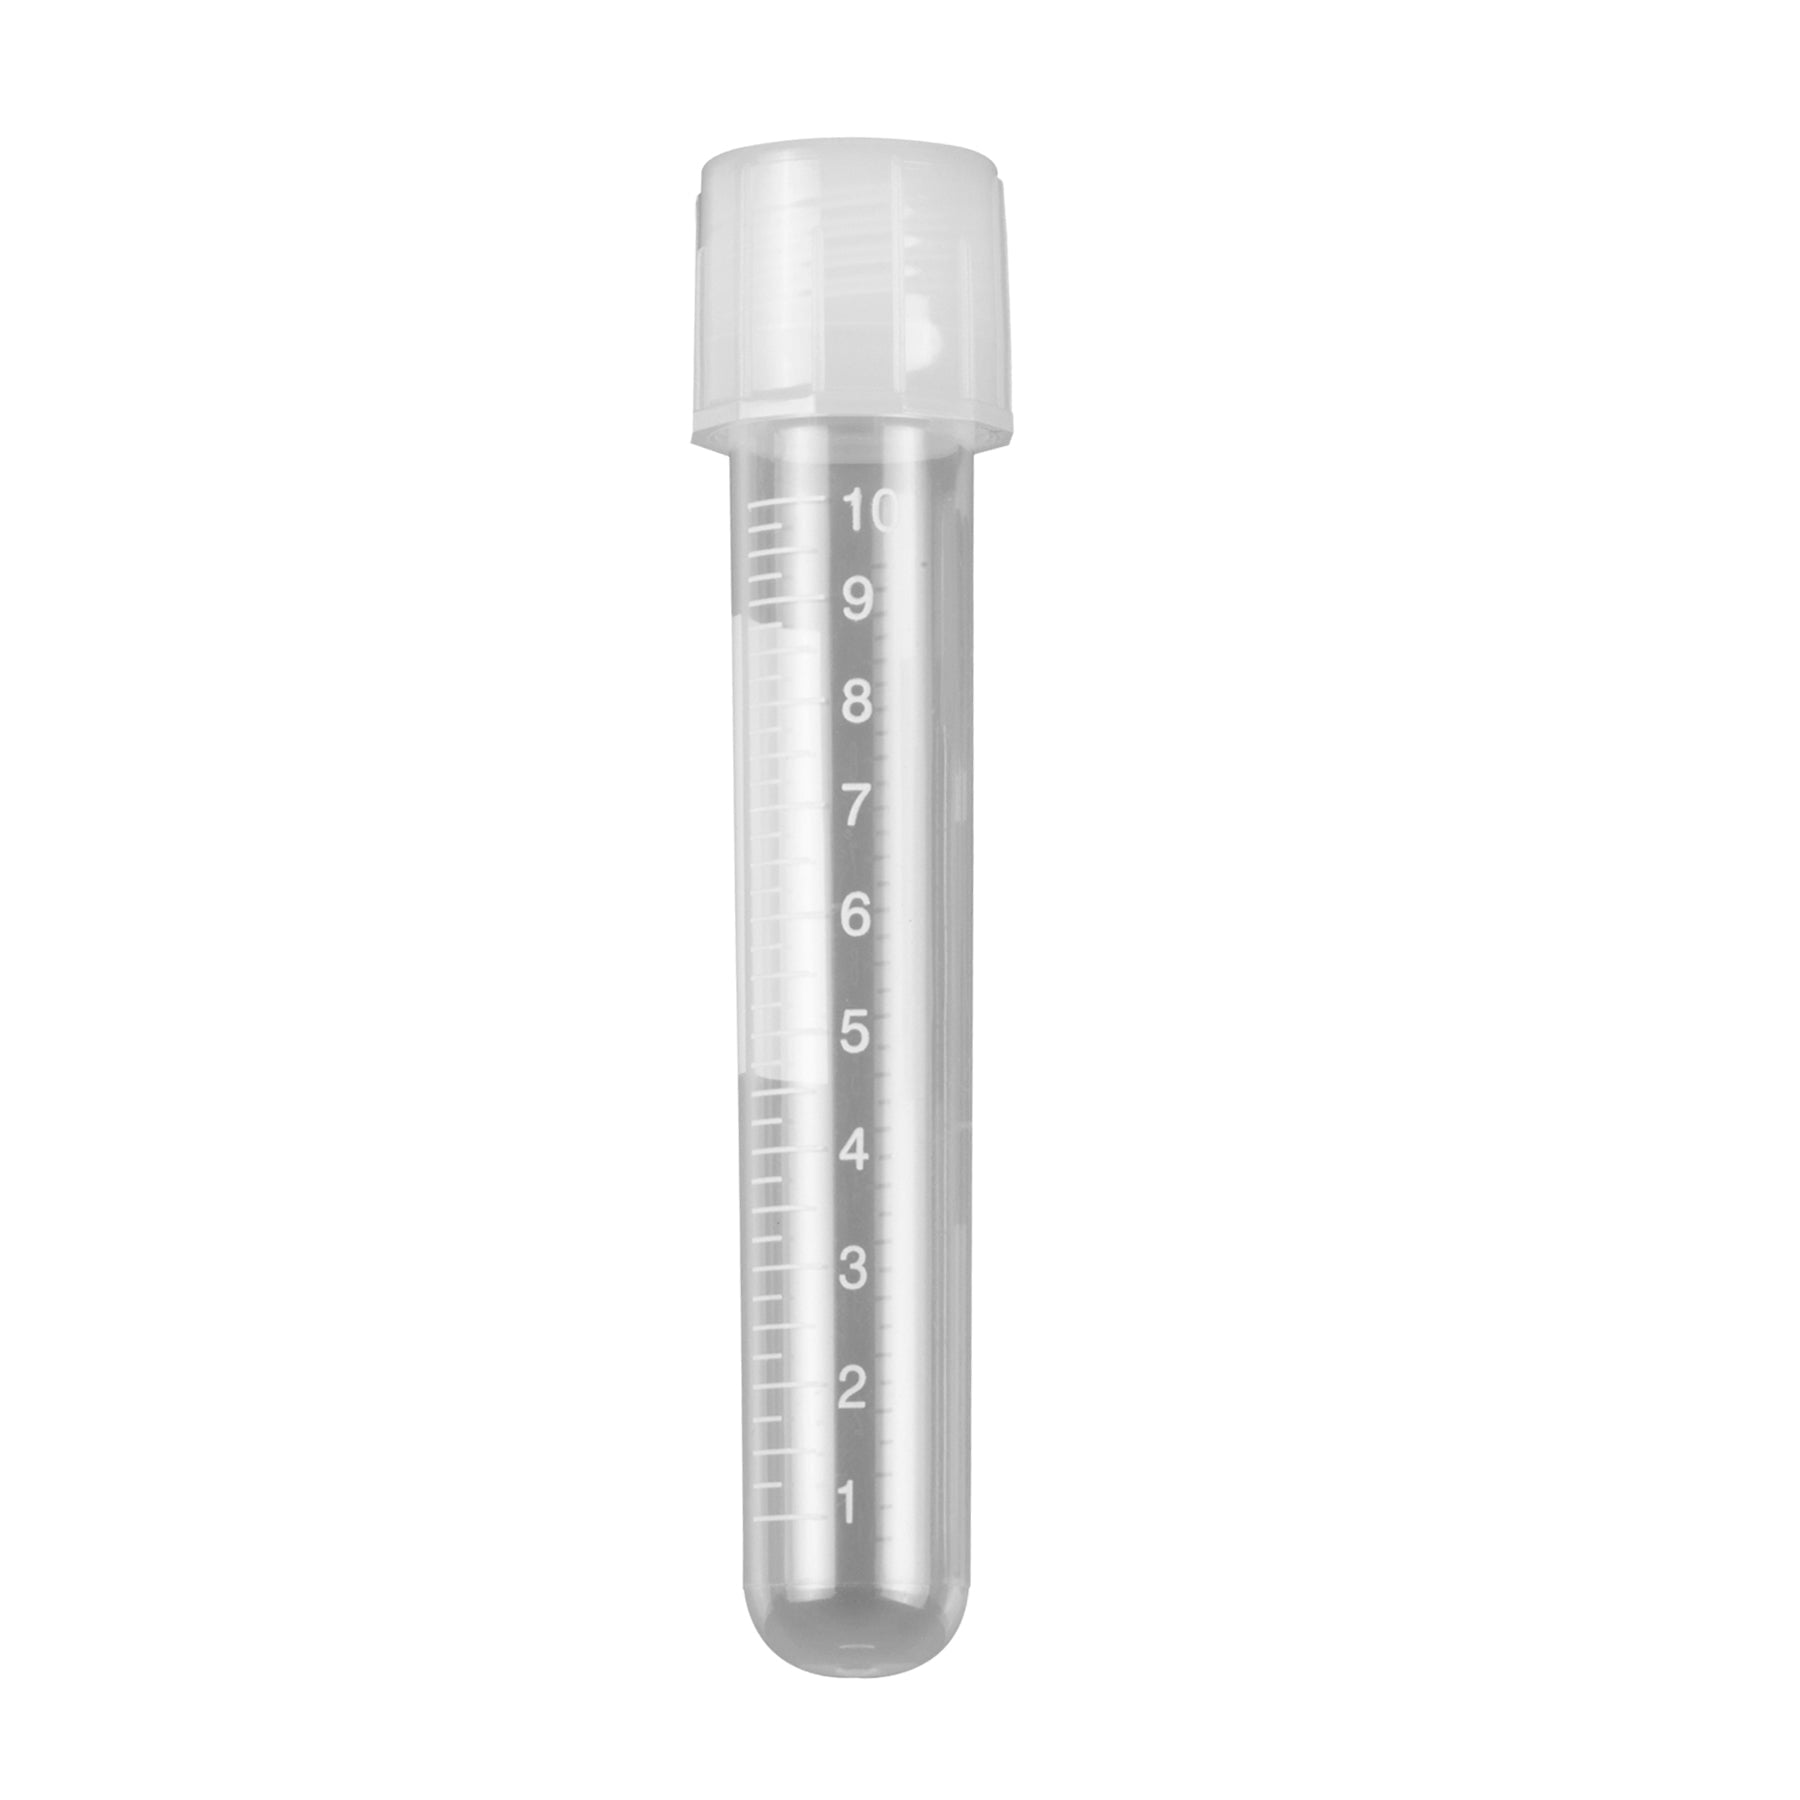 MTC Bio T8840 Culture Tube, 14mL, 17 x 100mm, PS, w/ attached 2-position screw-cap, printed graduations, sterile, 20 bags of 25 tubes